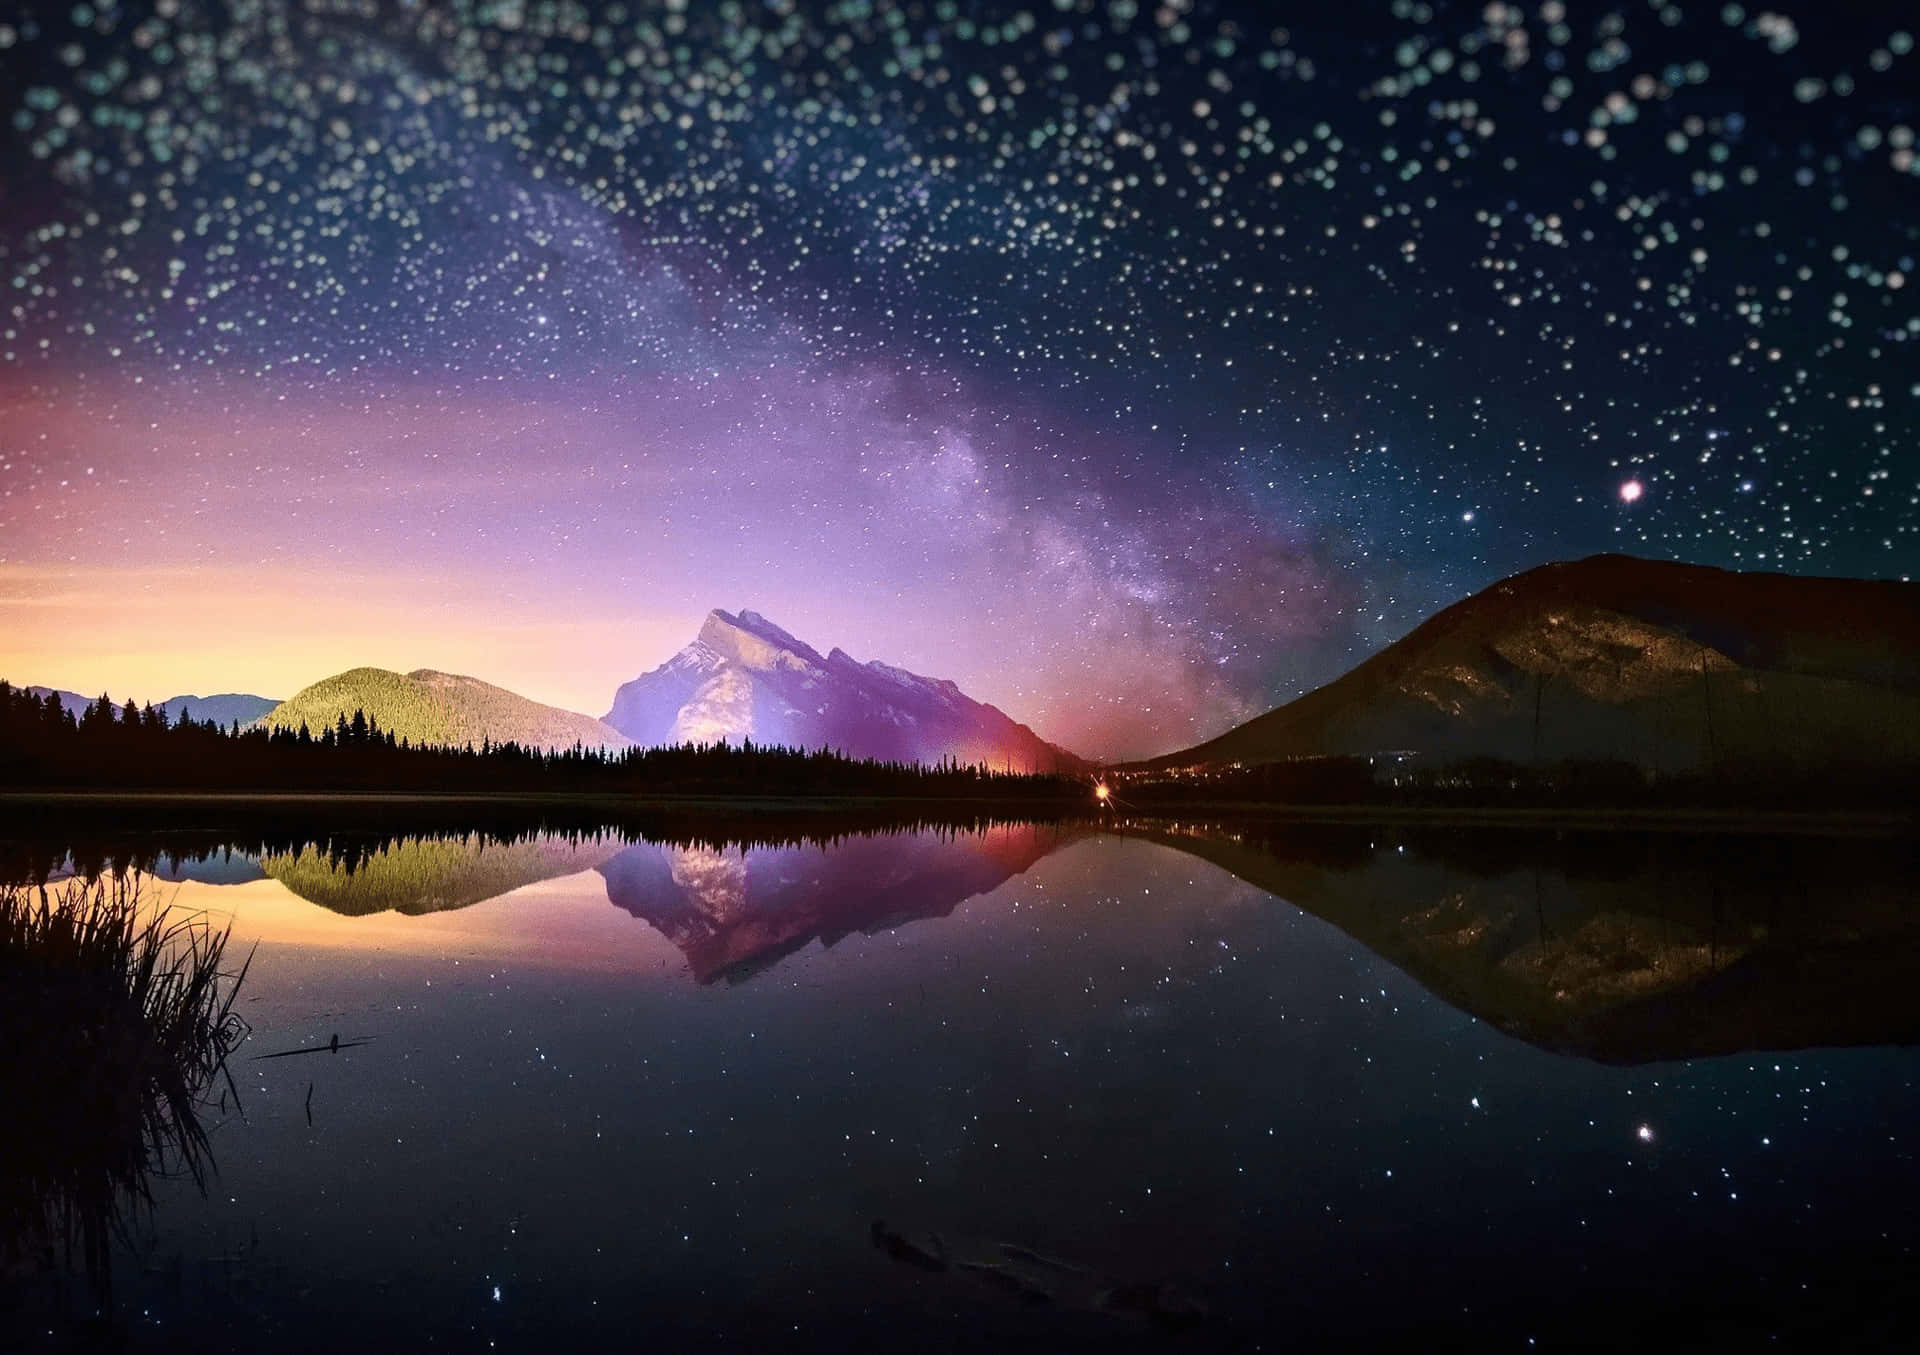 “Admire the wonders of the night sky with a stunning starry background”